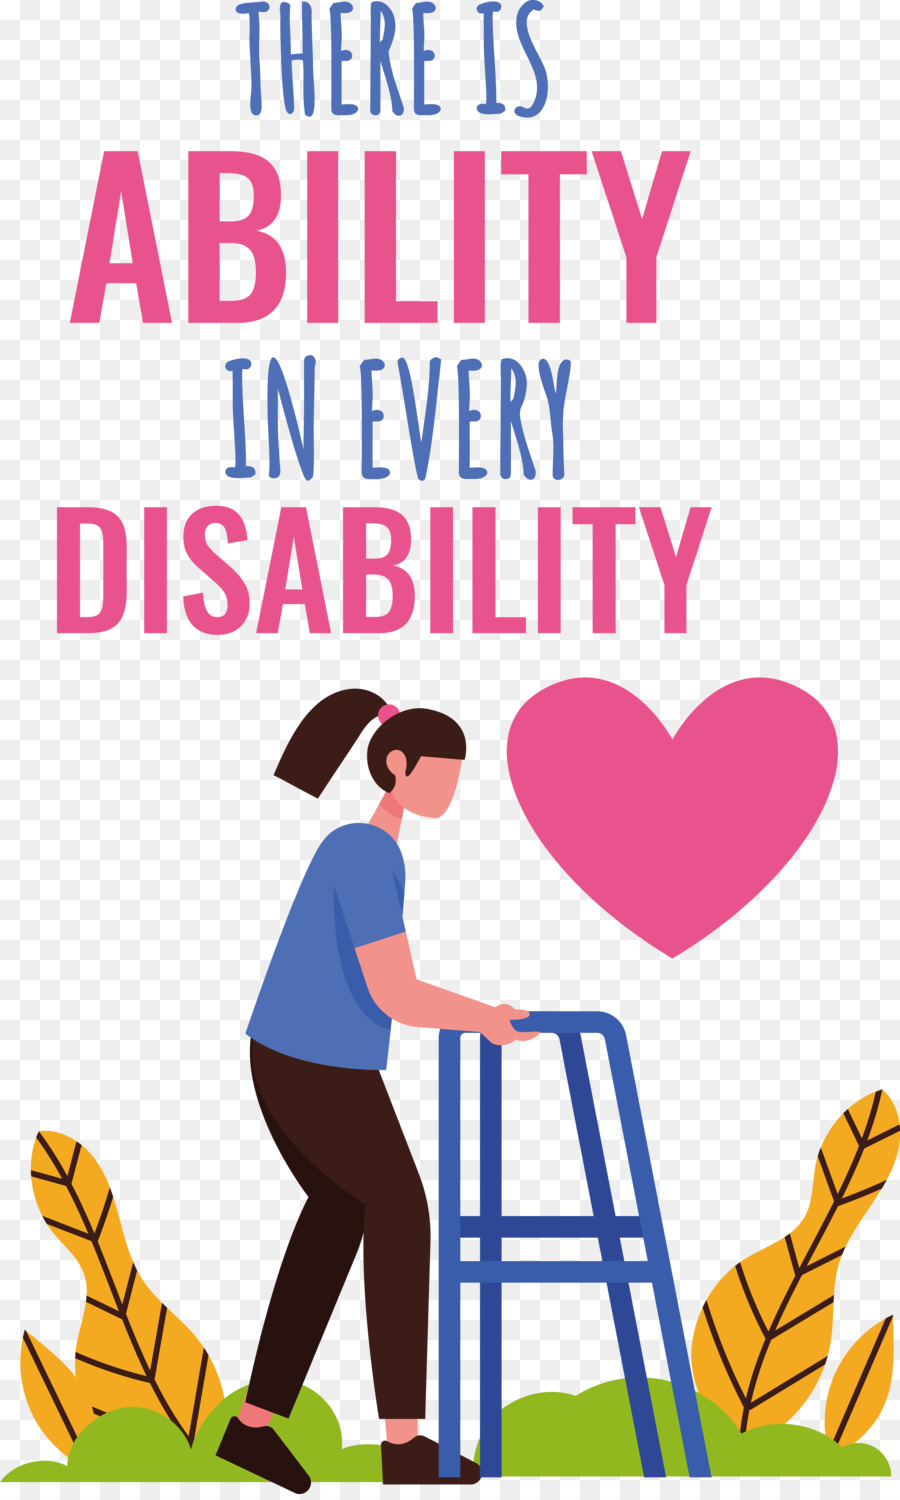 international disability day never give up international day disabled persons